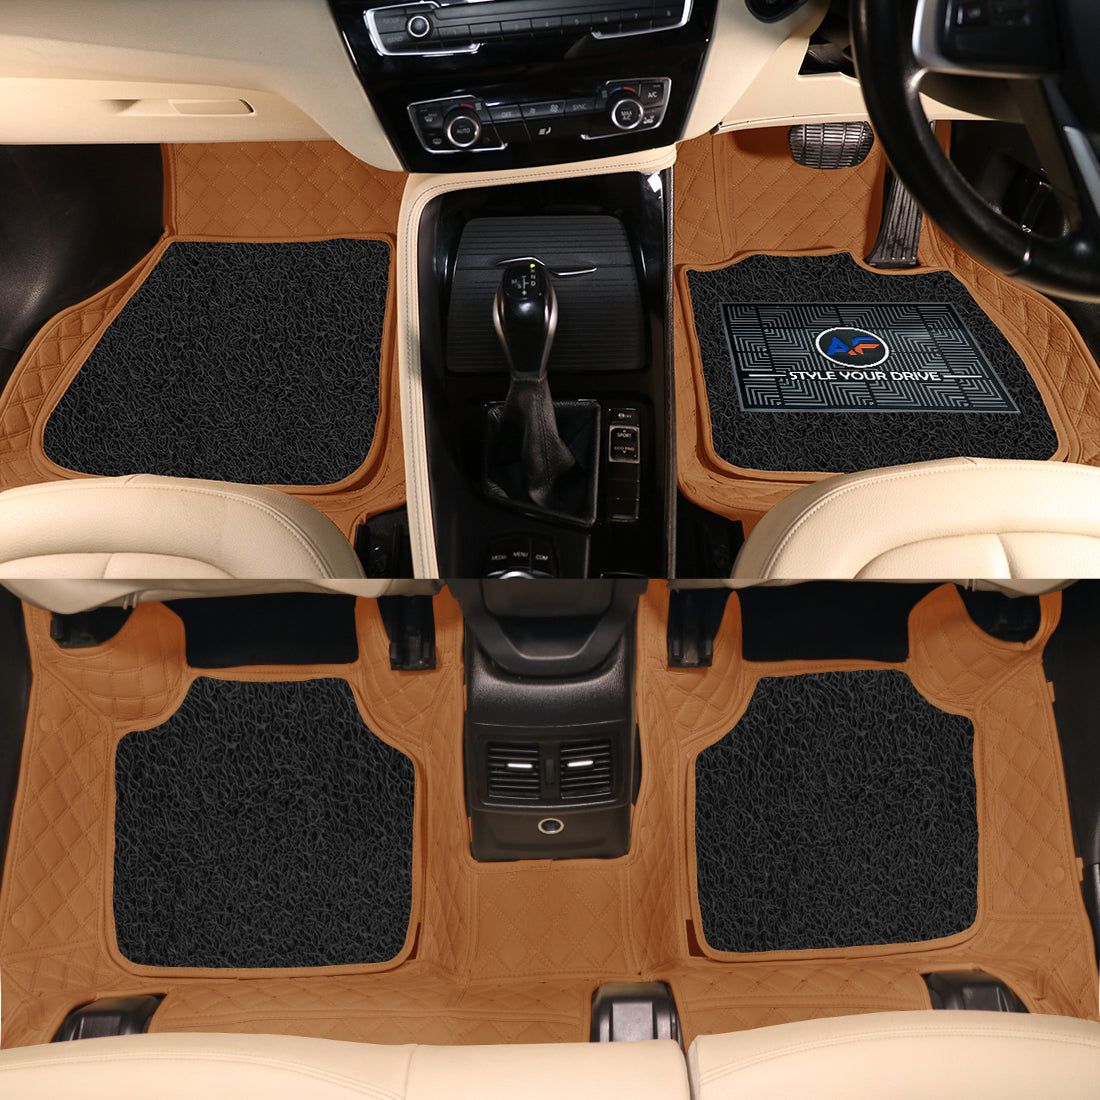 Toyota Innova 2015 7D Luxury Car Mat, All Weather Proof, Anti-Skid, 100% Waterproof & Odorless with Unique Diamond Fish Design (24mm Luxury PU Leather, 2 Rows)